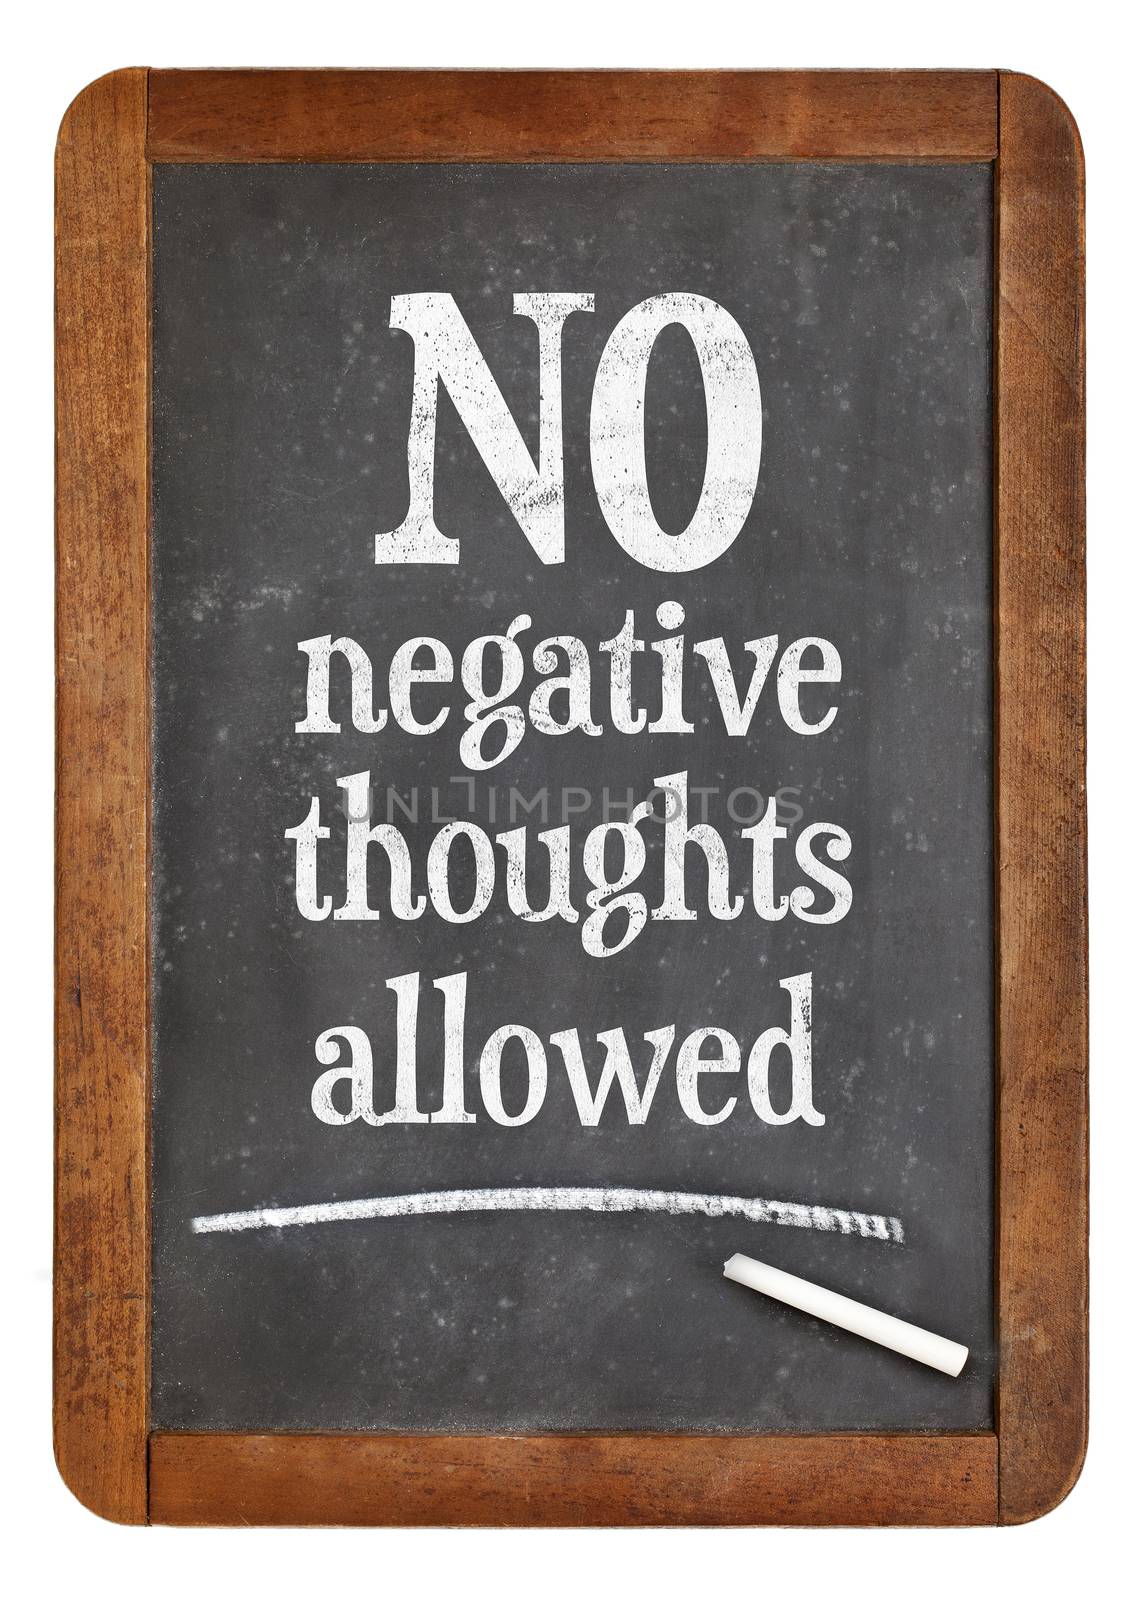 No negative thoughts allowed - motivational and positive text on a vintage slate blackboard